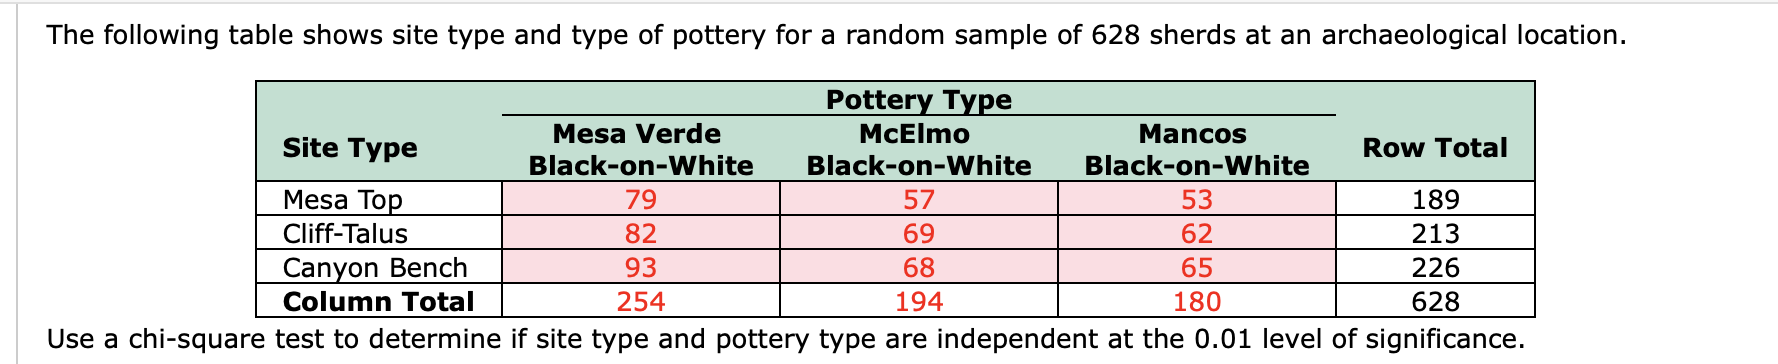 The following table shows site type and type of pottery for a random sample of 628 sherds at an archaeological location.
Pottery Type
Site Type
Mesa Verde
McElmo
Mancos
Row Total
Black-on-White
Black-on-White
Black-on-White
Mesa Top
79
57
53
189
Cliff-Talus
Canyon Bench
82
69
62
213
93
68
65
226
Column Total
254
194
180
628
Use a chi-square test to determine if site type and pottery type are independent at the 0.01 level of significance.
